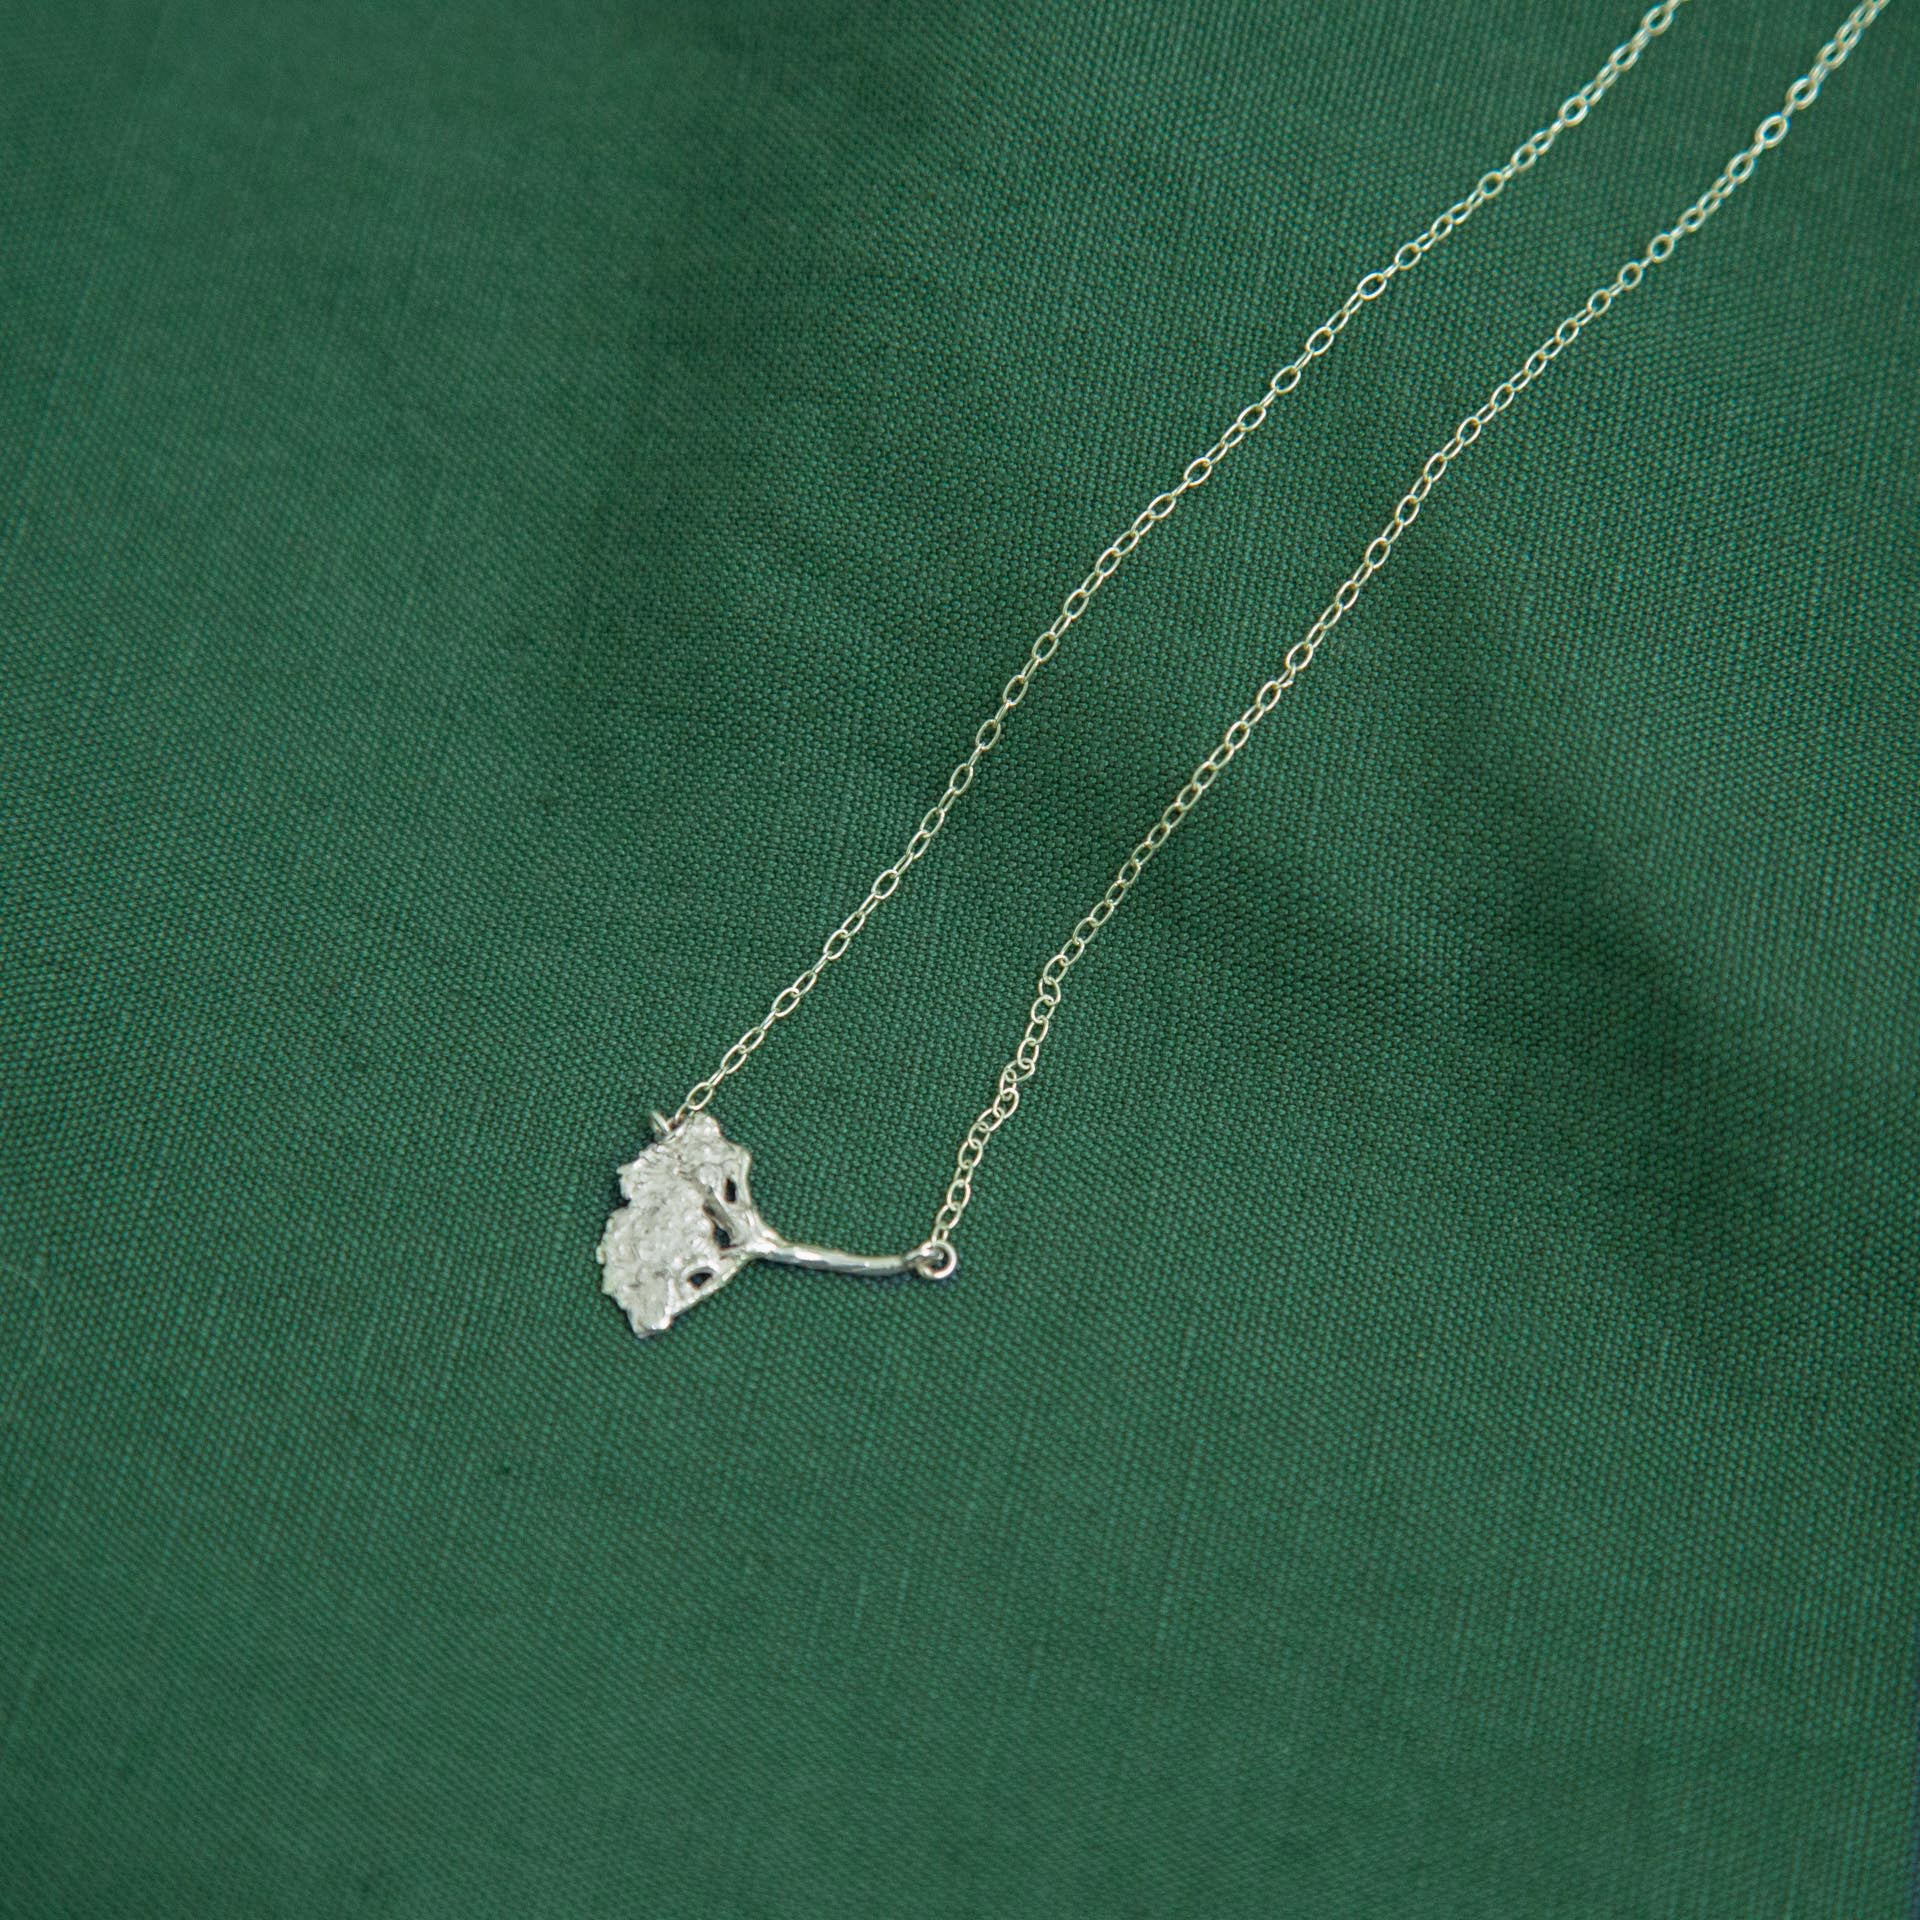  cow parsley silver necklace on green cloth